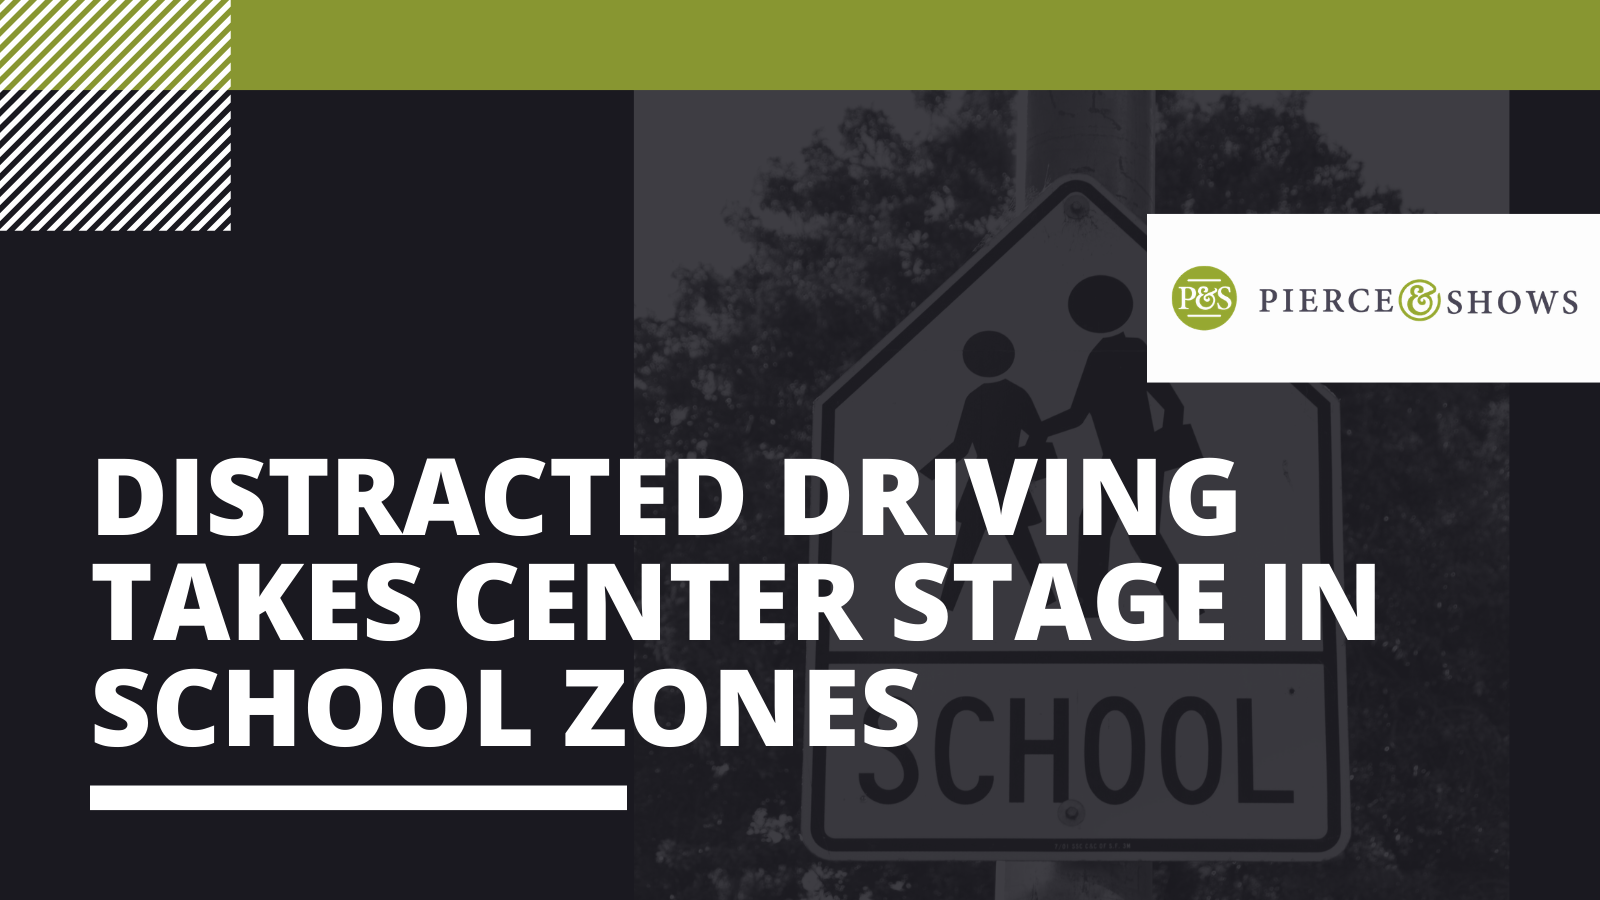 Distracted Driving Takes Center Stage In School Zones - Pierce & Shows injury attorney Baton Rouge, Louisiana